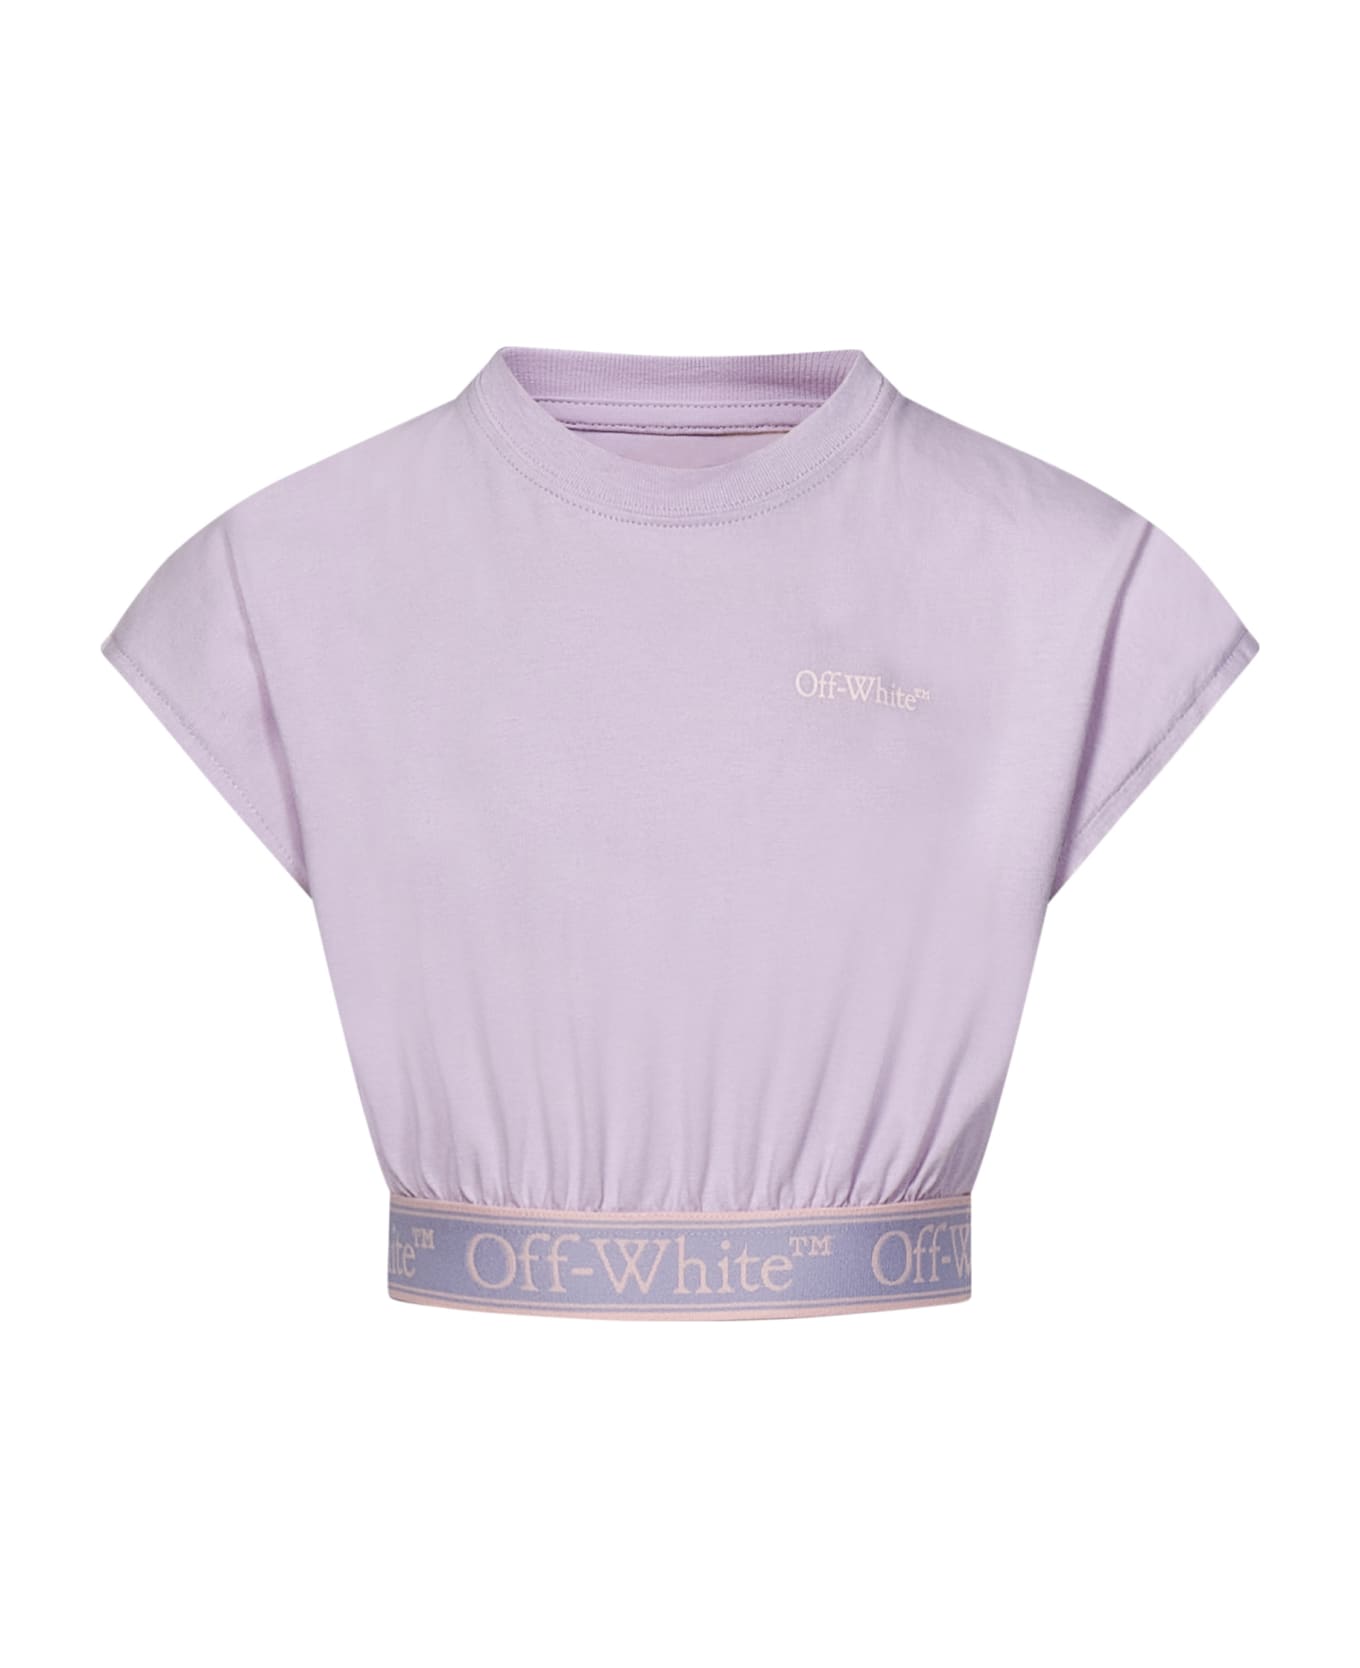 Off-White T-shirt - Lilac